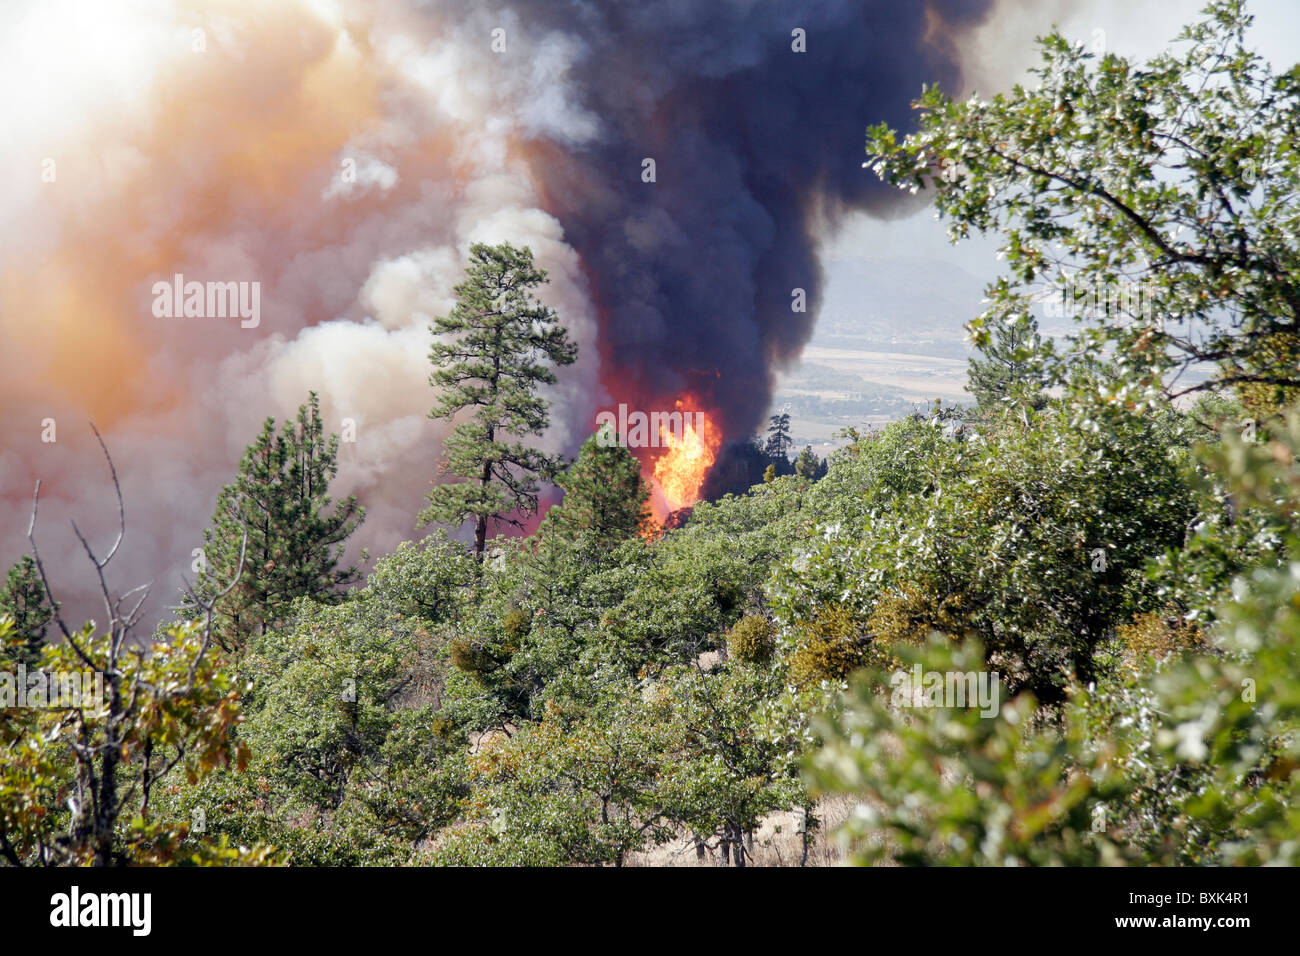 Wildfire with large flames Stock Photo